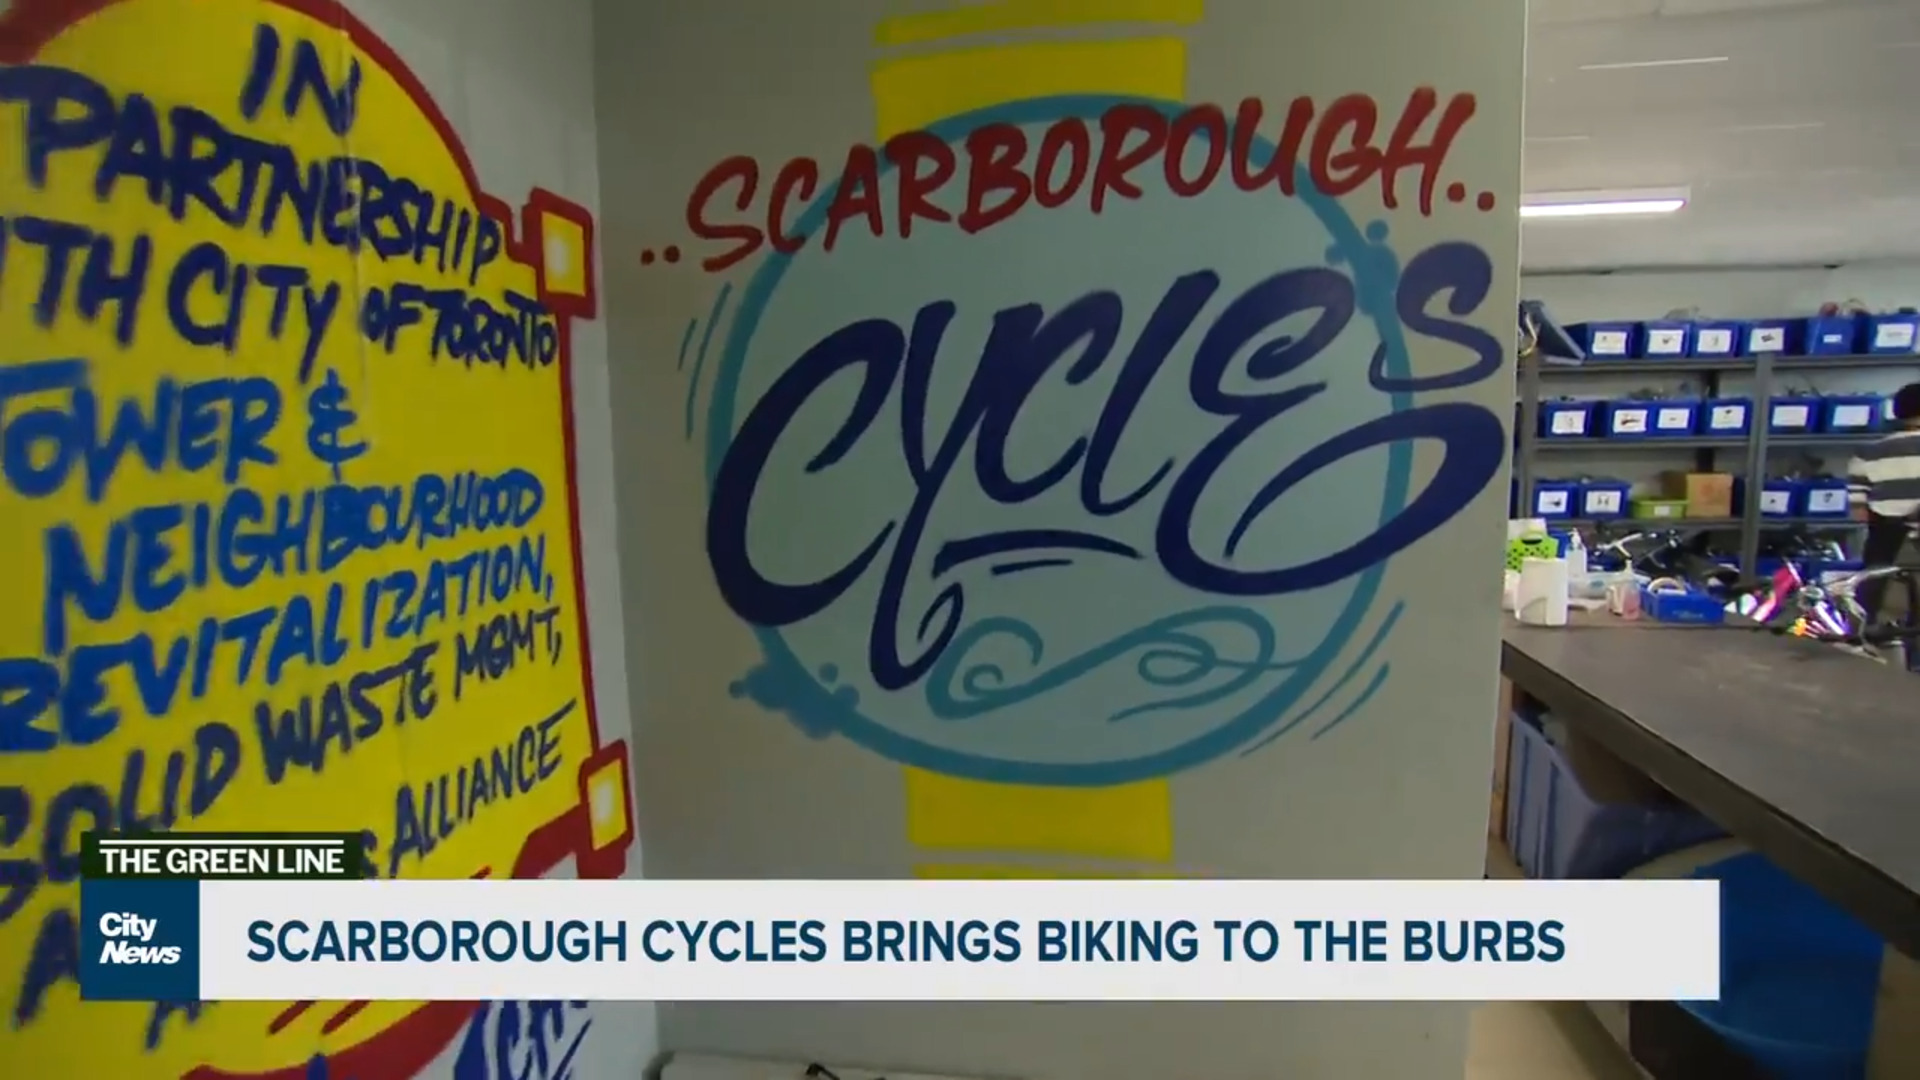 Scarborough Cycles brings biking to the burbs